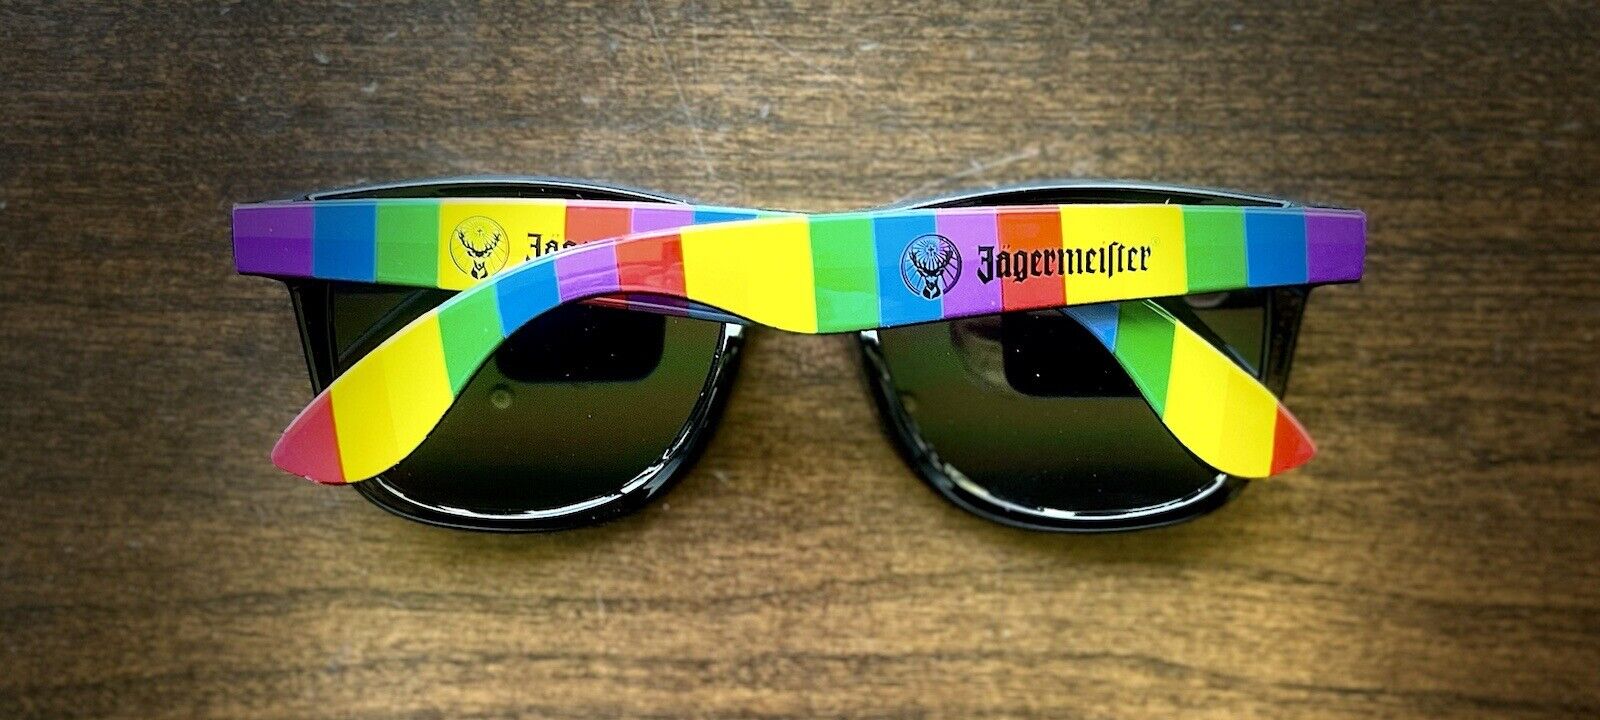 Jagermeister Sunglasses NEW IN WRAPPER German Liqueur Bar Shades